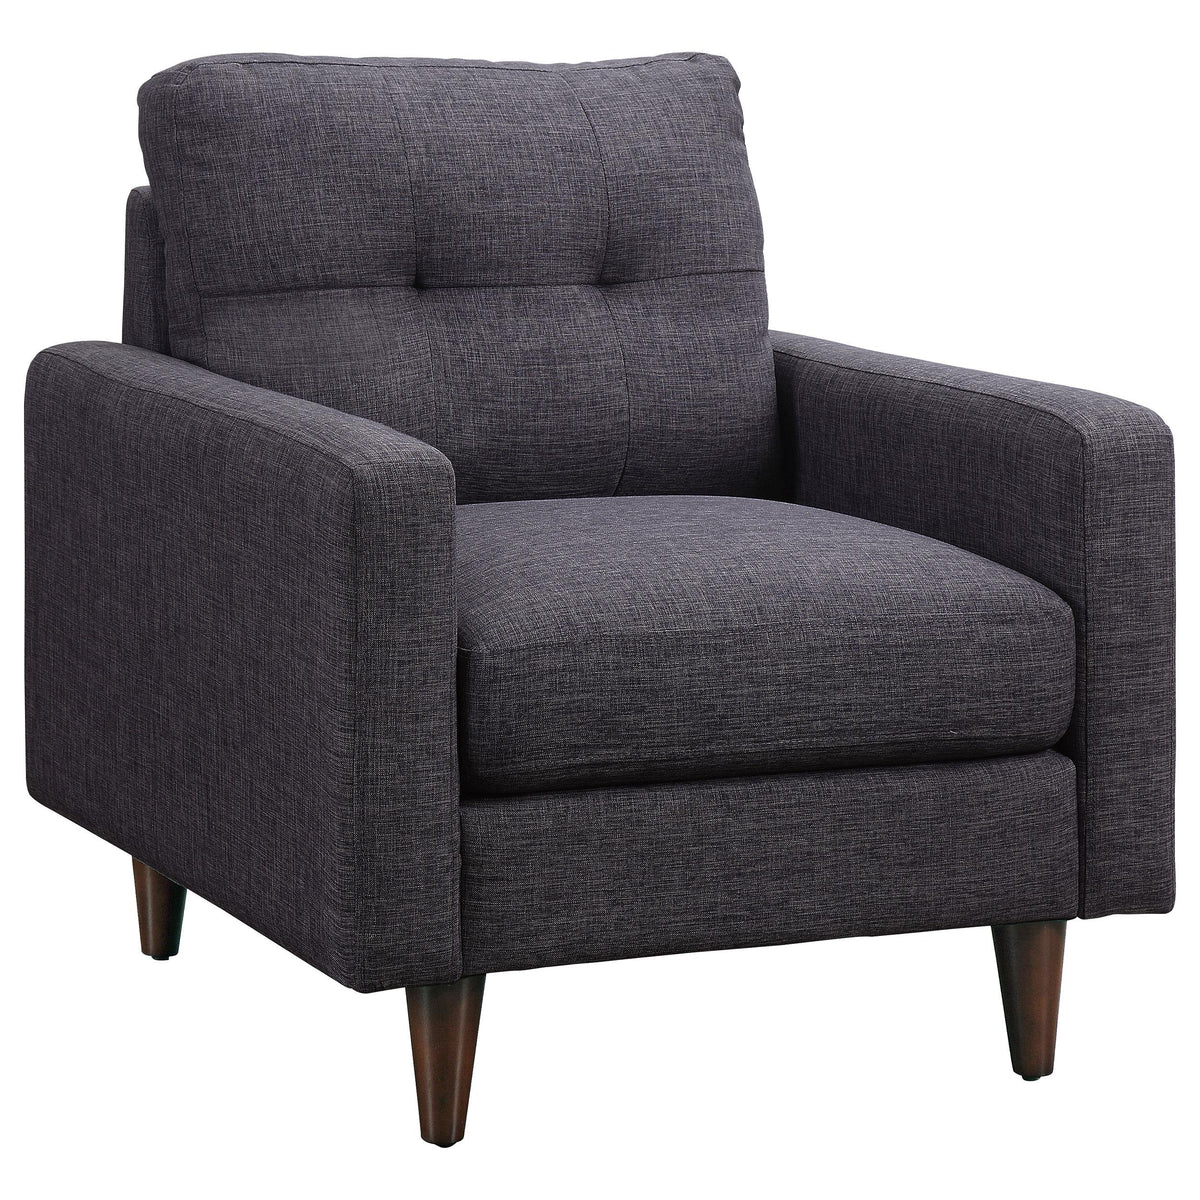 Watsonville Tufted Back Chair Grey  Half Price Furniture